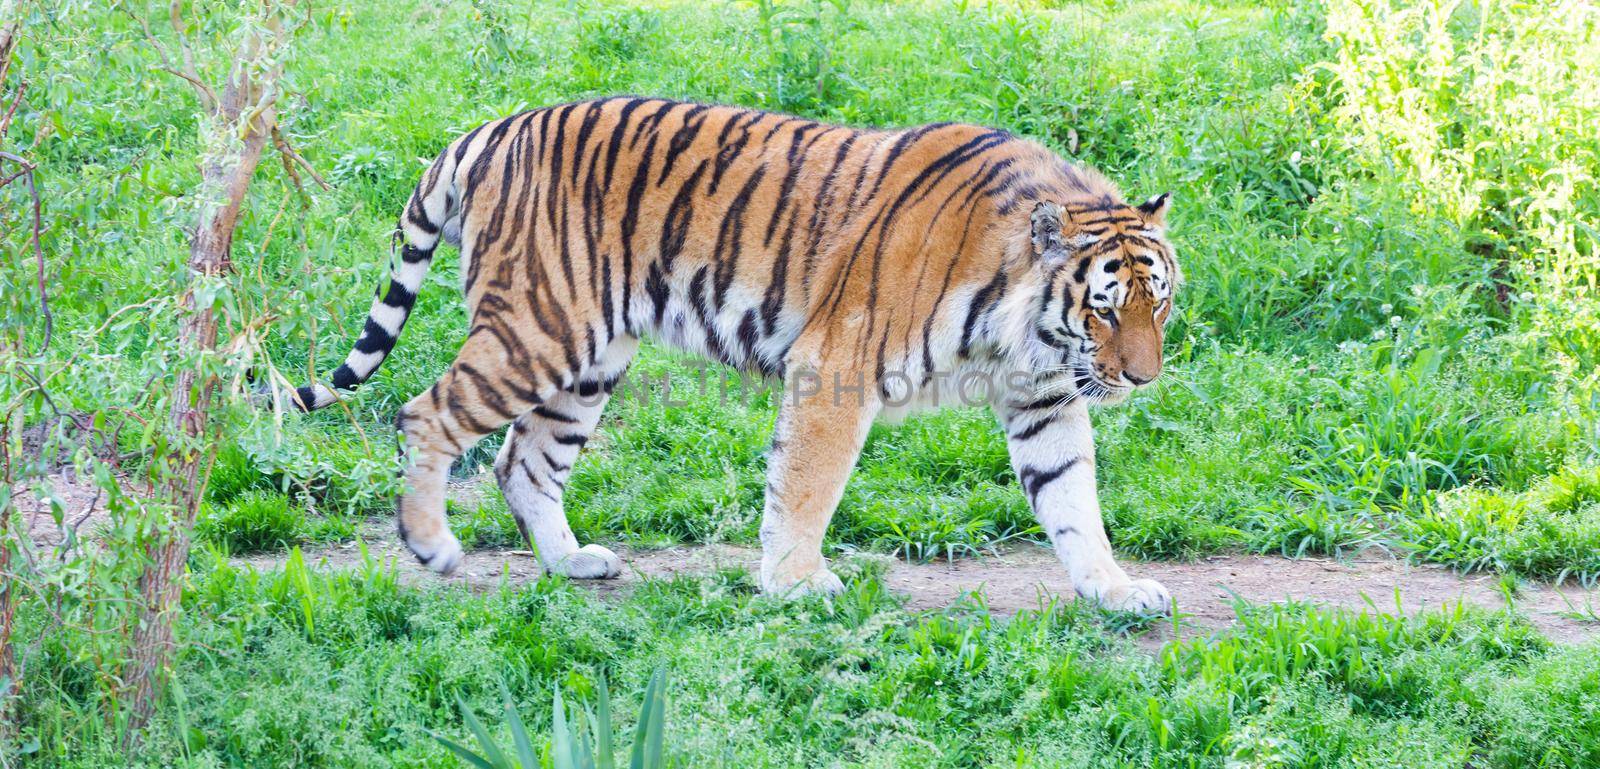 Angry tiger in a wildlife zoo - one of the biggest carnivore in nature.